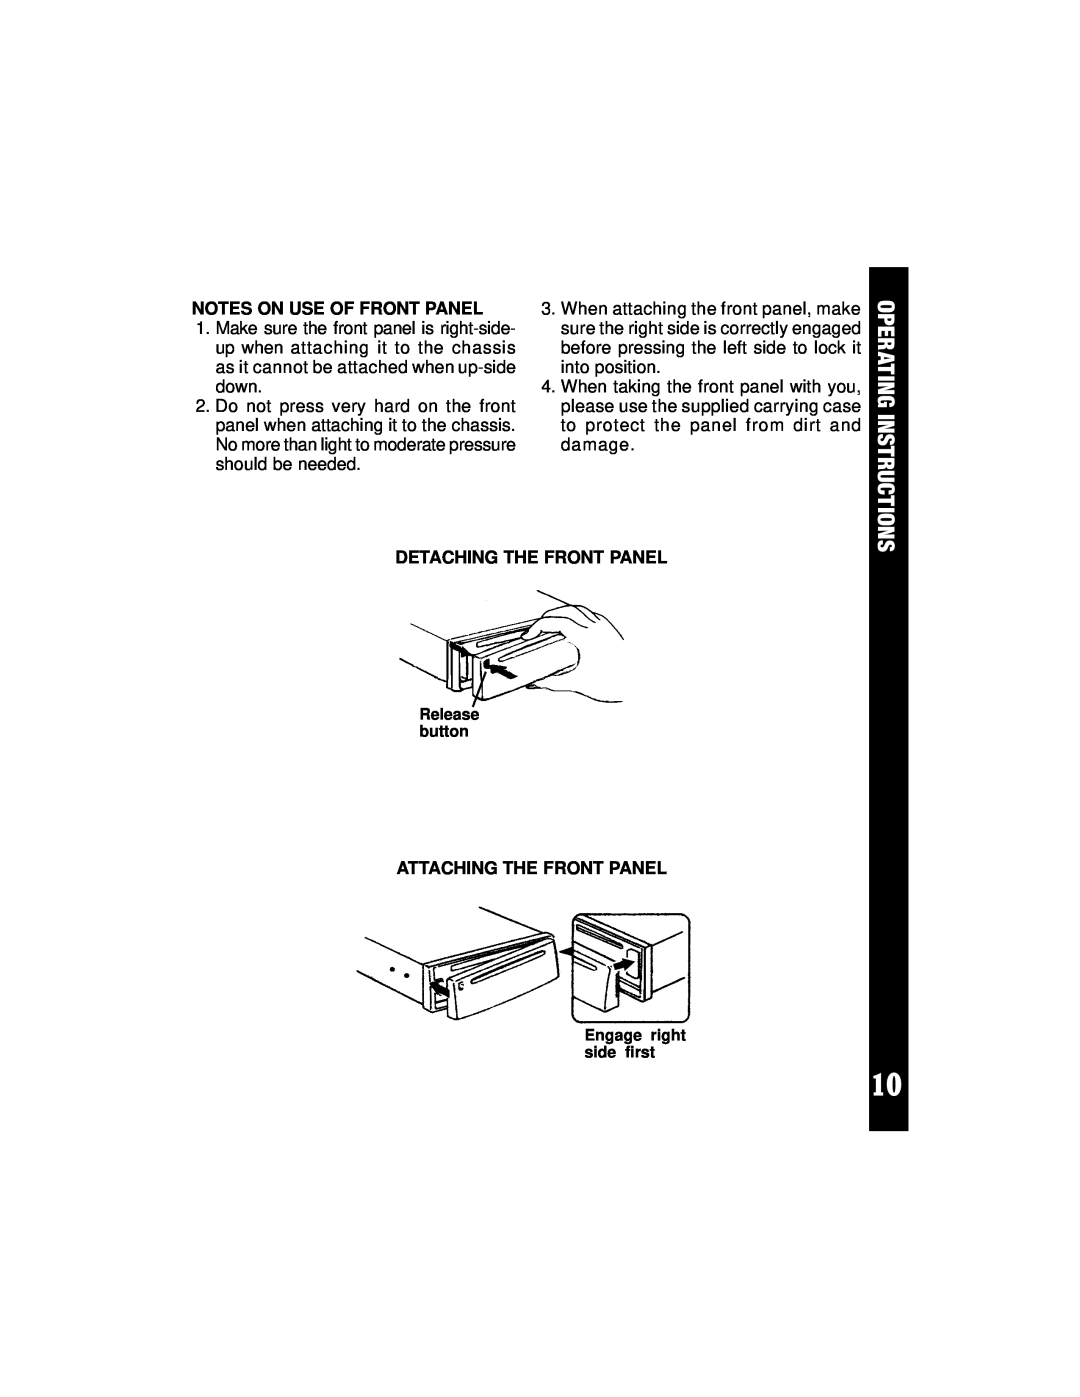 Audiovox ACD-21 Operating Instructions, Notes On Use Of Front Panel, Detaching The Front Panel, Attaching The Front Panel 